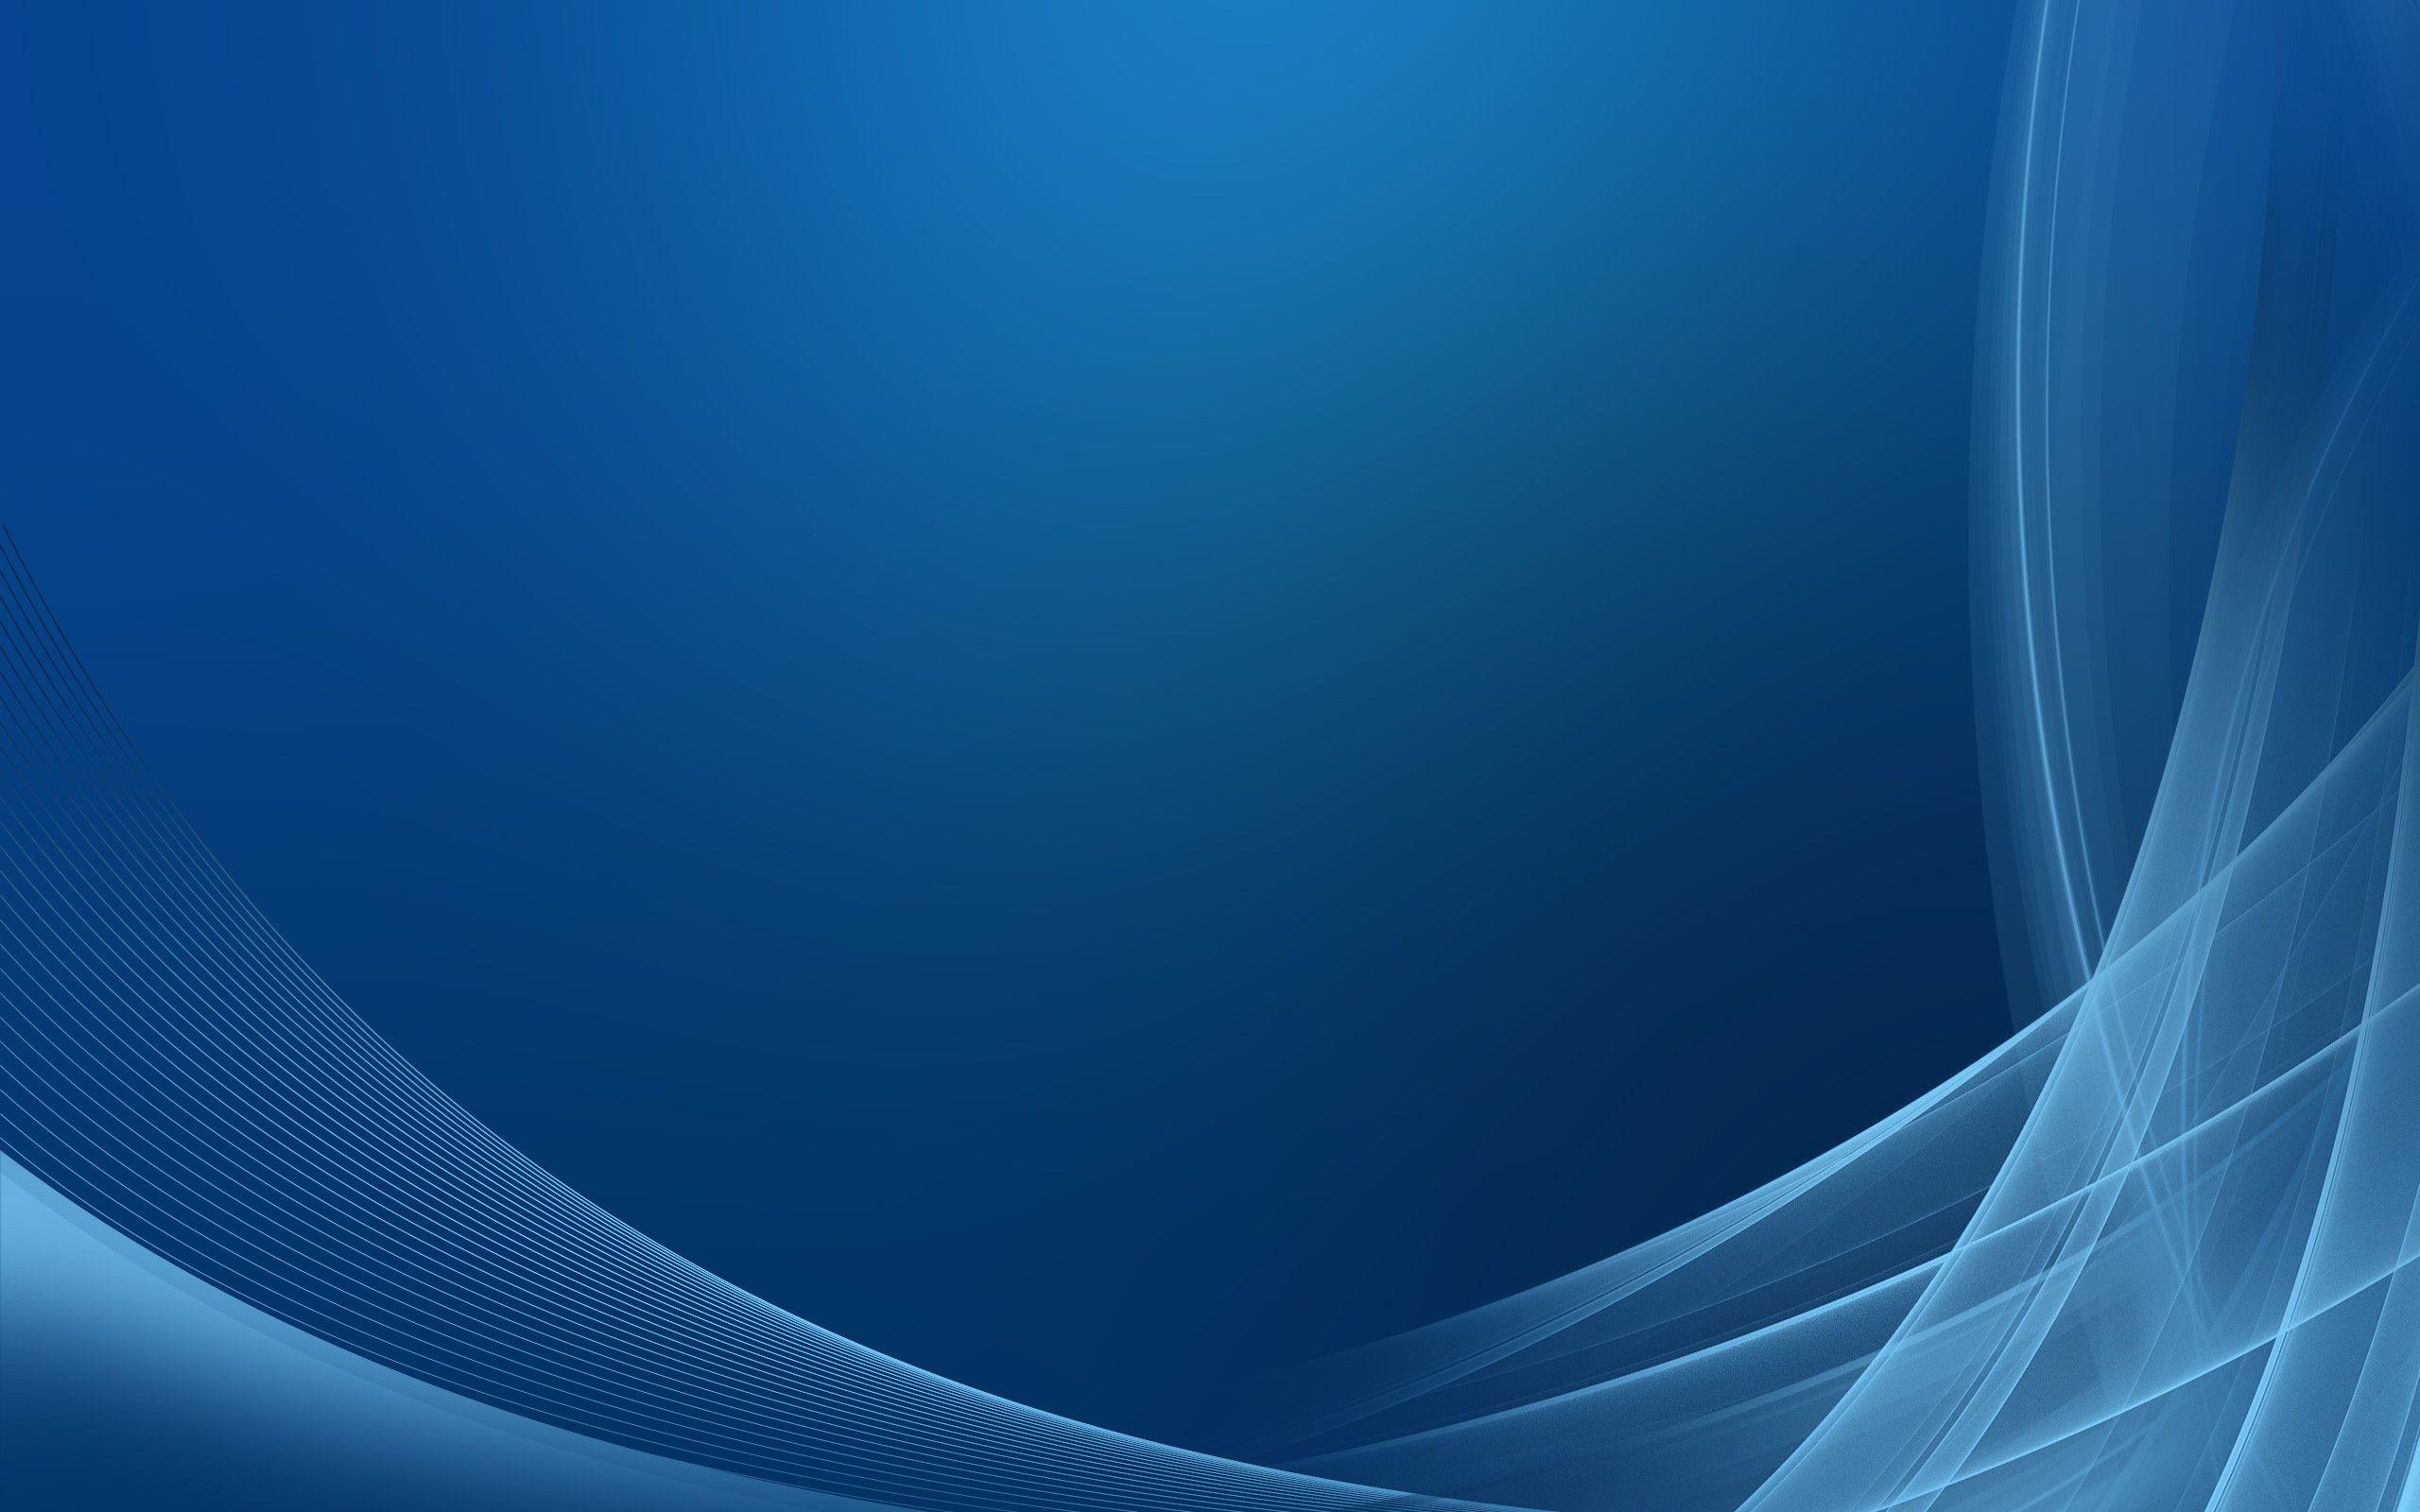 Hd Blue Abstract Wallpaper Widescreen 2 HD Wallpaper. Hdimges